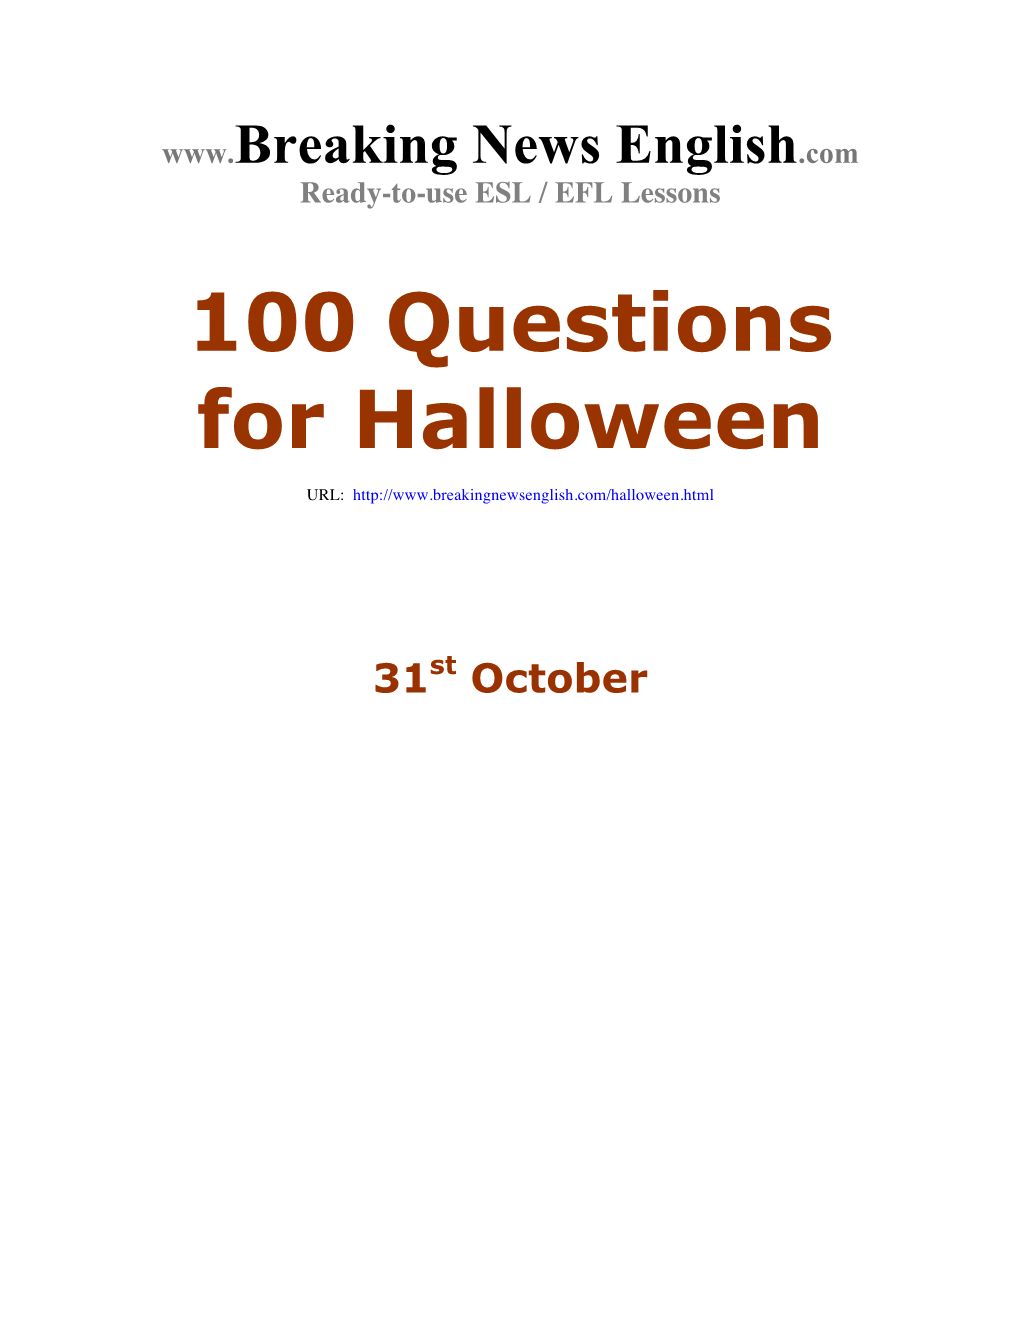 100 Questions for Halloween